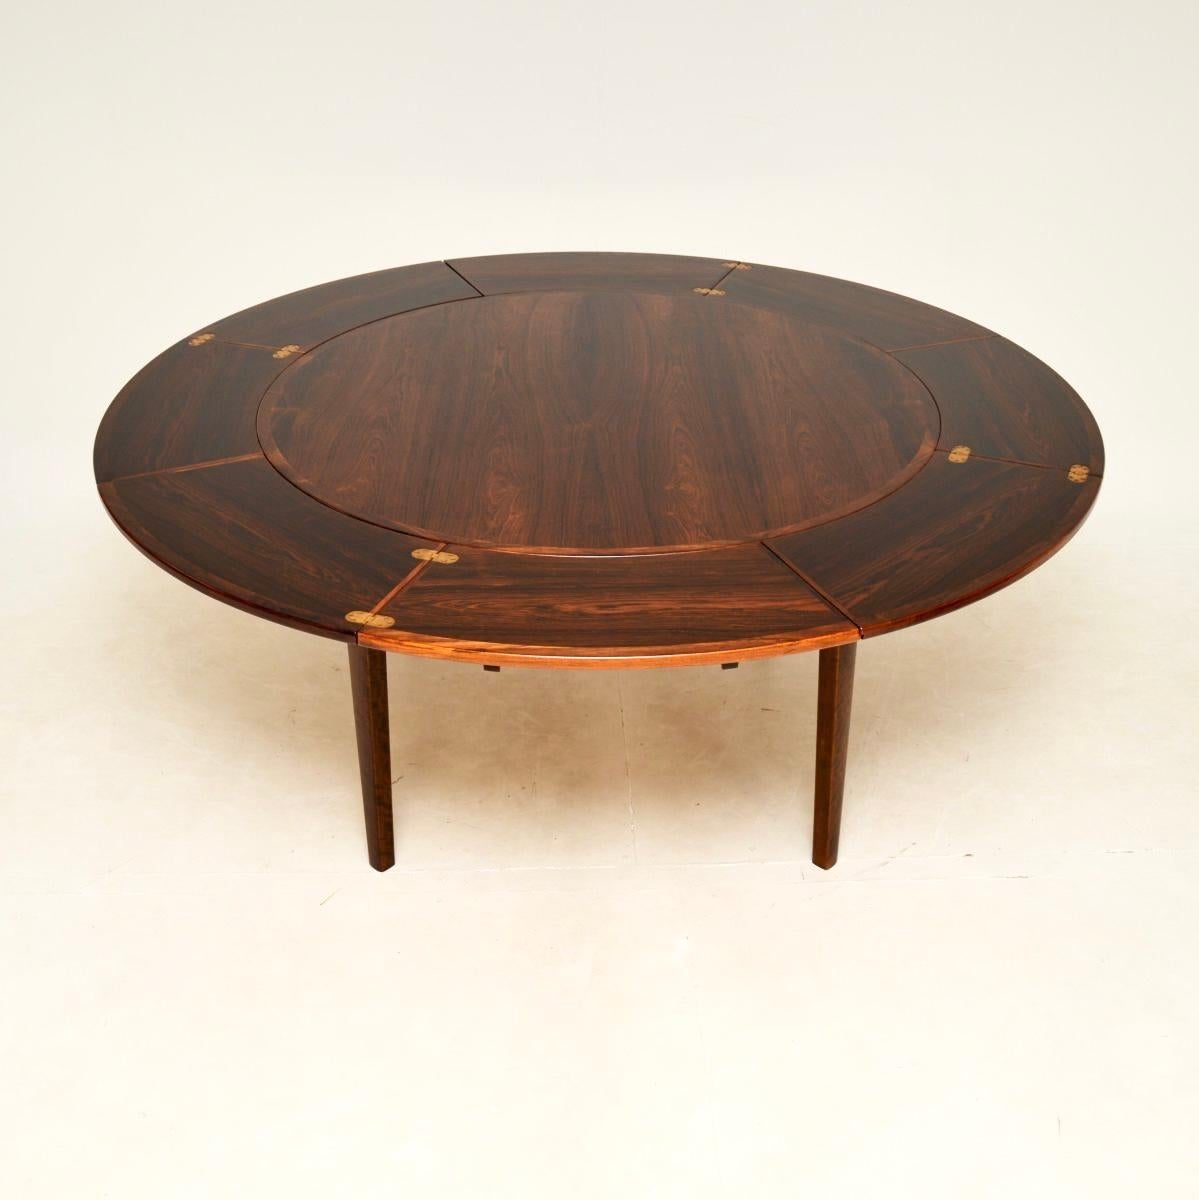 An absolutely stunning and iconic Danish vintage Flip Flap Lotus dining table by Dyrlund. This was made in Denmark, it dates from the 1960’s.

This is a superb quality table with a fantastic design. When closed the circular top can seat four, there